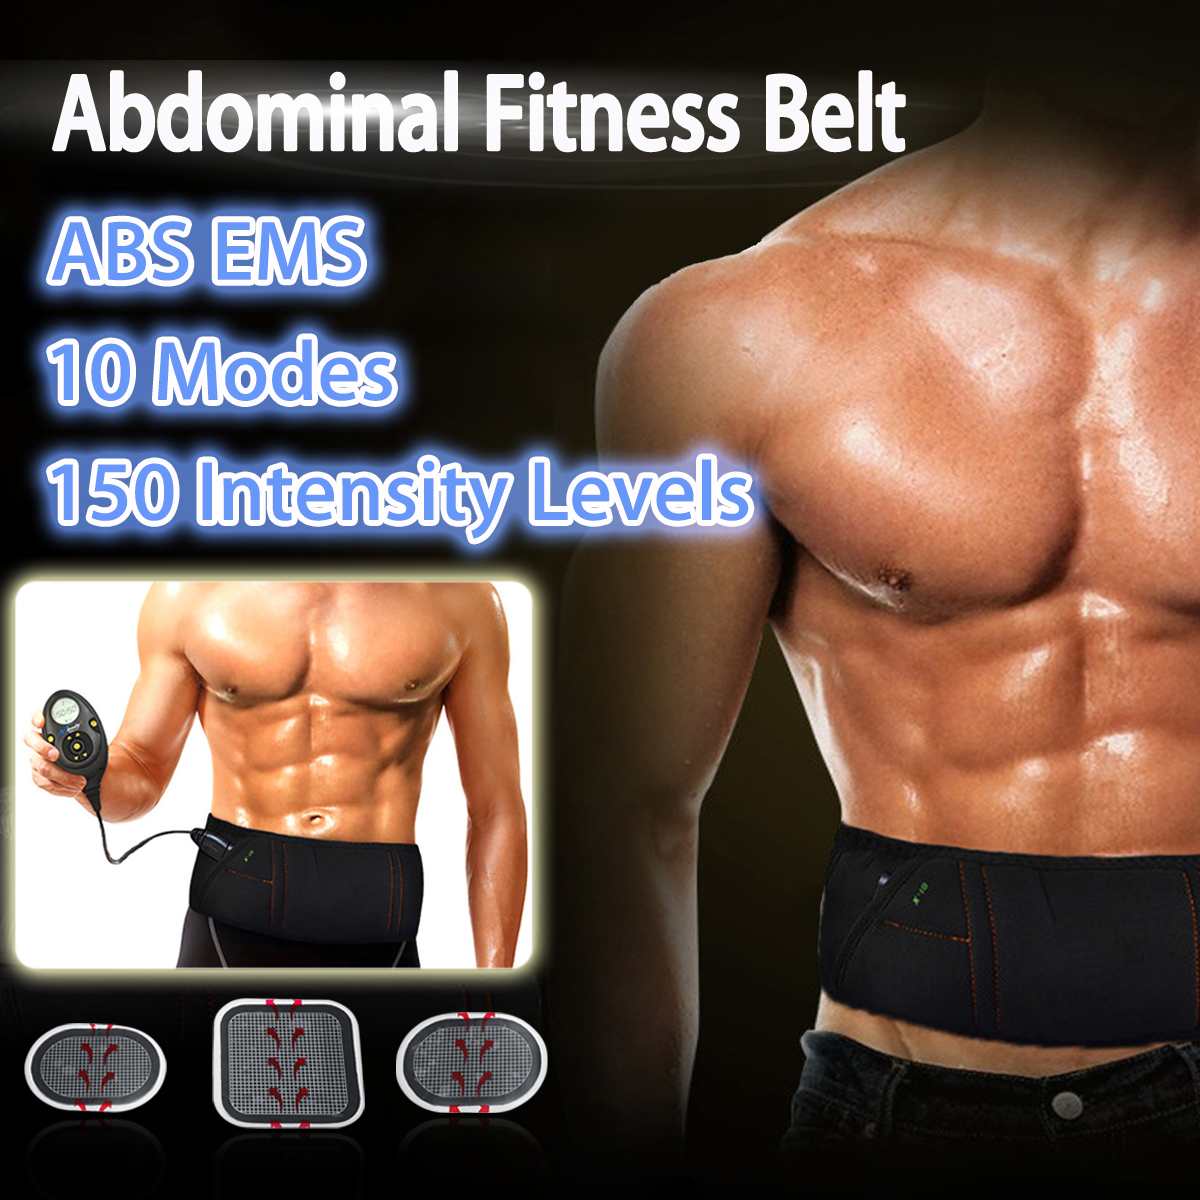 NEW EMS Electric Slimming Belt Abdominal Muscle Lose Weight Fitness Massage Sway Vibration Belly Muscle Waist Trainer Stimulator